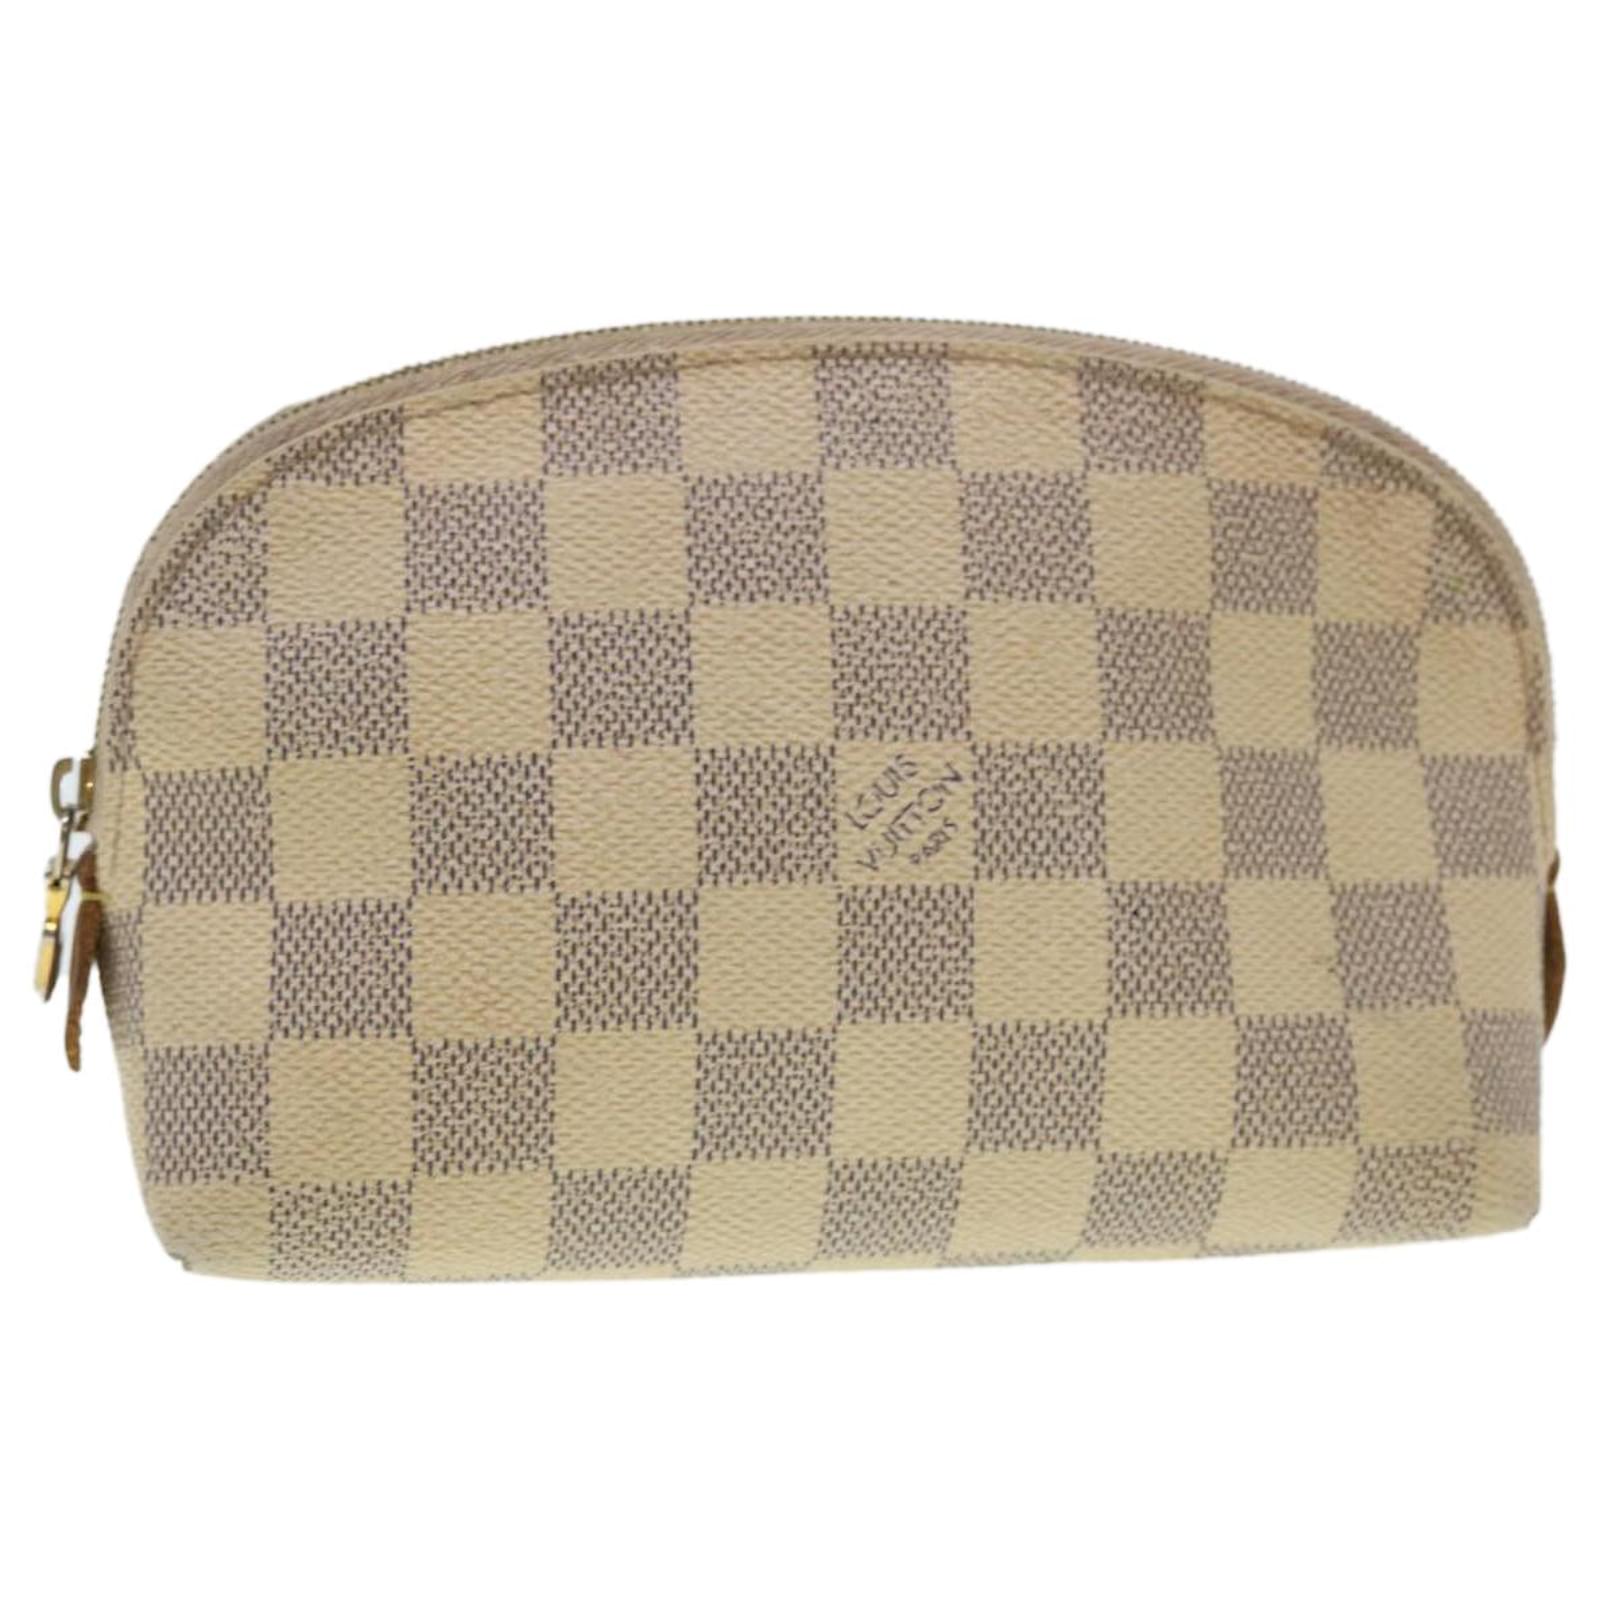 Shop Louis Vuitton Cosmetic pouch (M47515, N60024, N47516) by